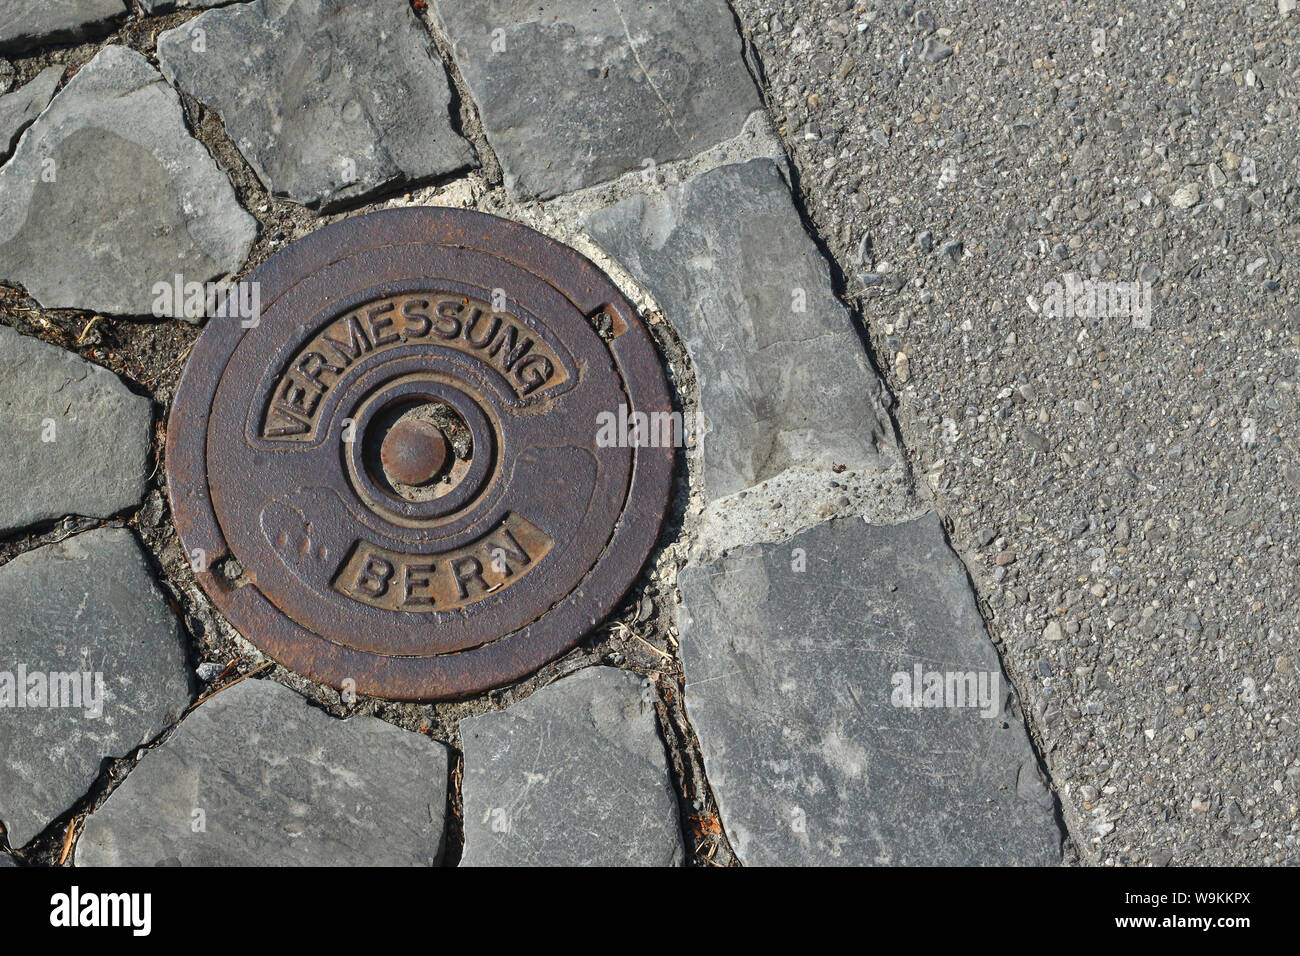 Bern, Switzerland - July 23, 2019: Benchmark on the street Europapromenade in Bern Switzerland. With these land surveyors can measure the land. Stock Photo